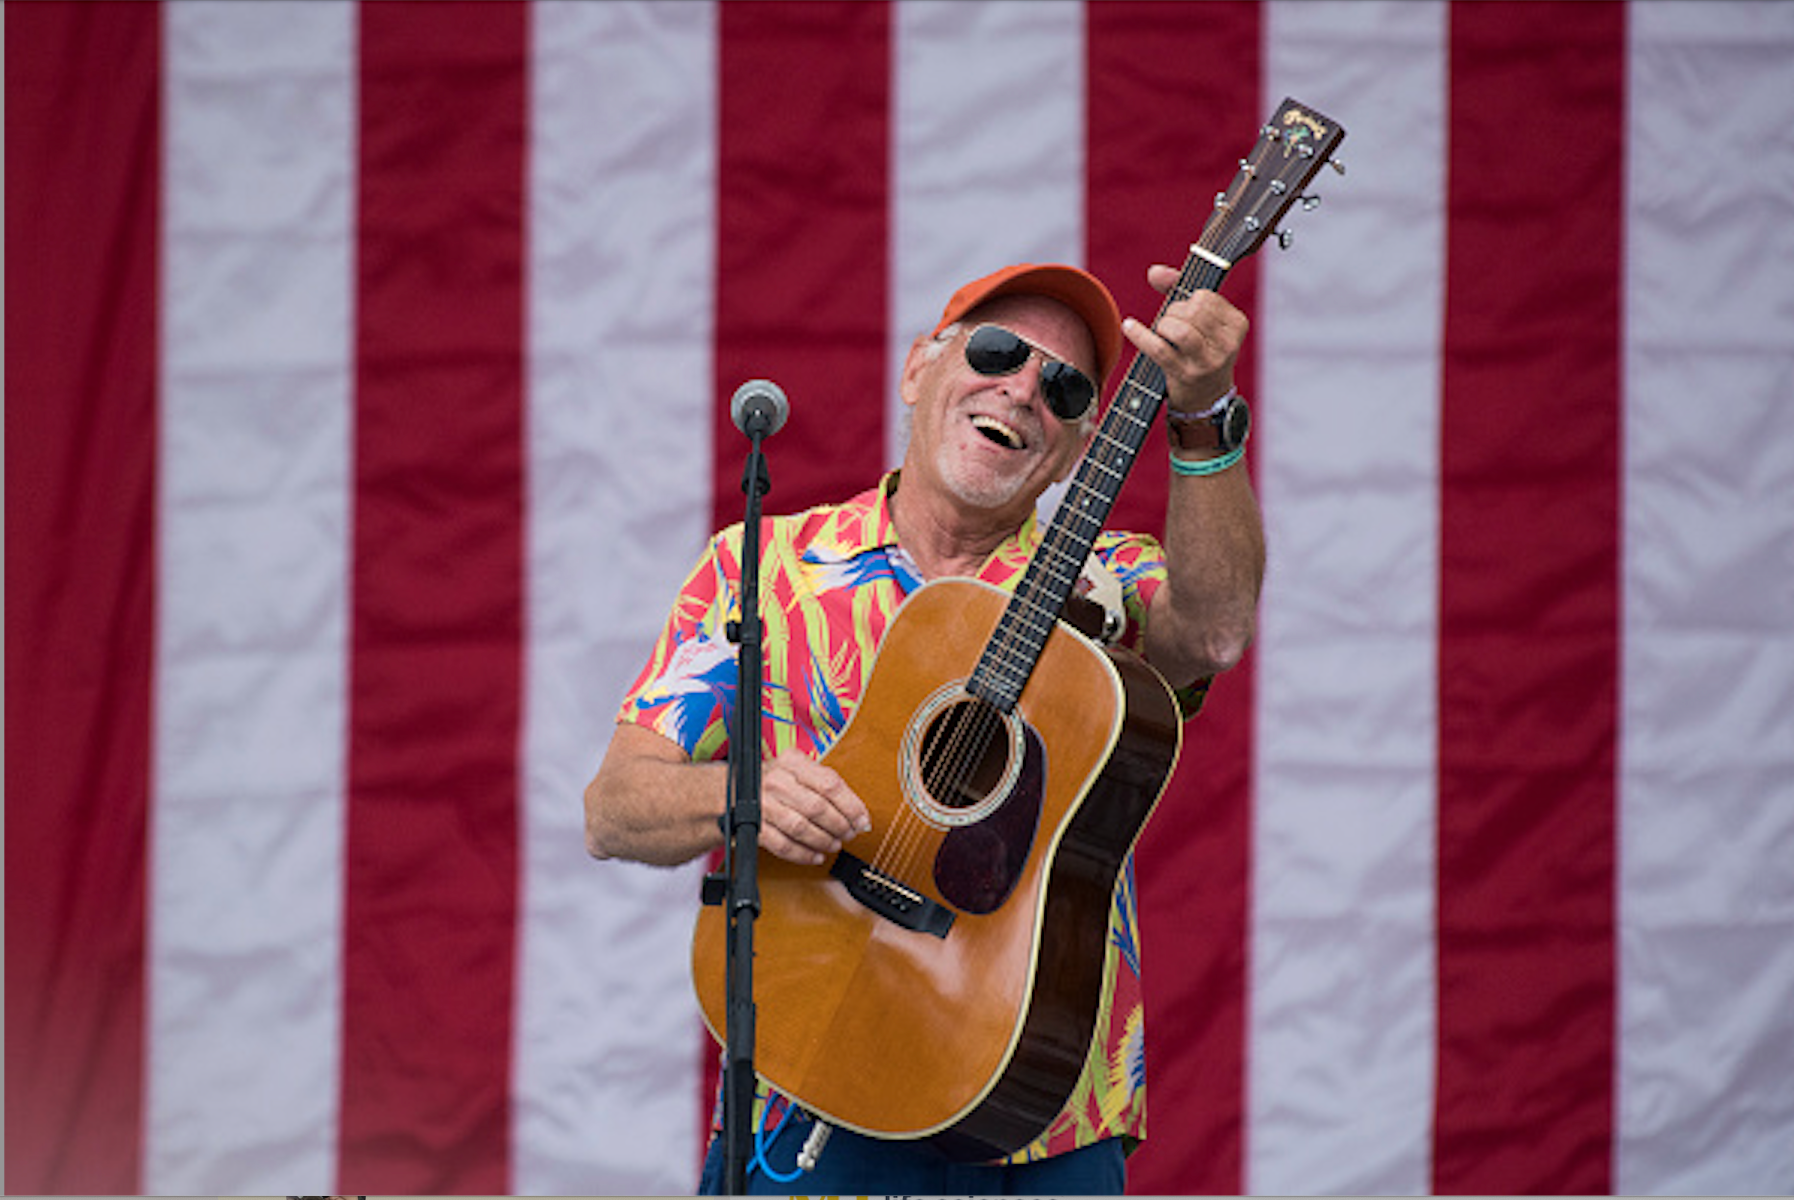 Jimmy Buffet, the "Margaritaville" singer-songwriter, died from Merkel cell carcinoma.  Image credit: Tom Williams / CQ-Roll Call, Inc. via Getty Images